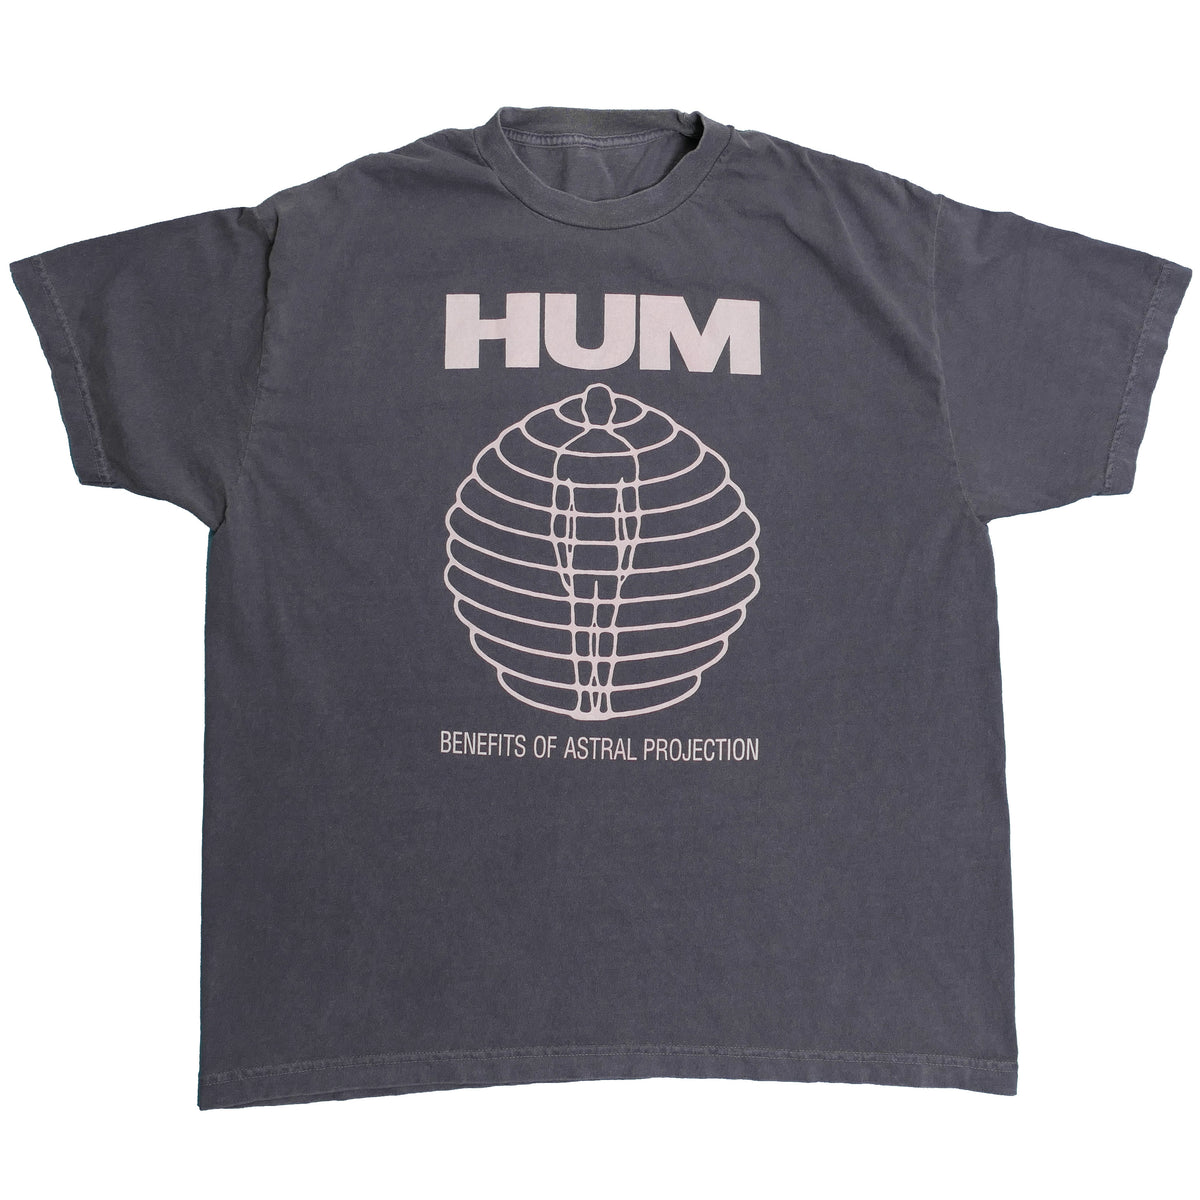 Hum Astral Projection Tee